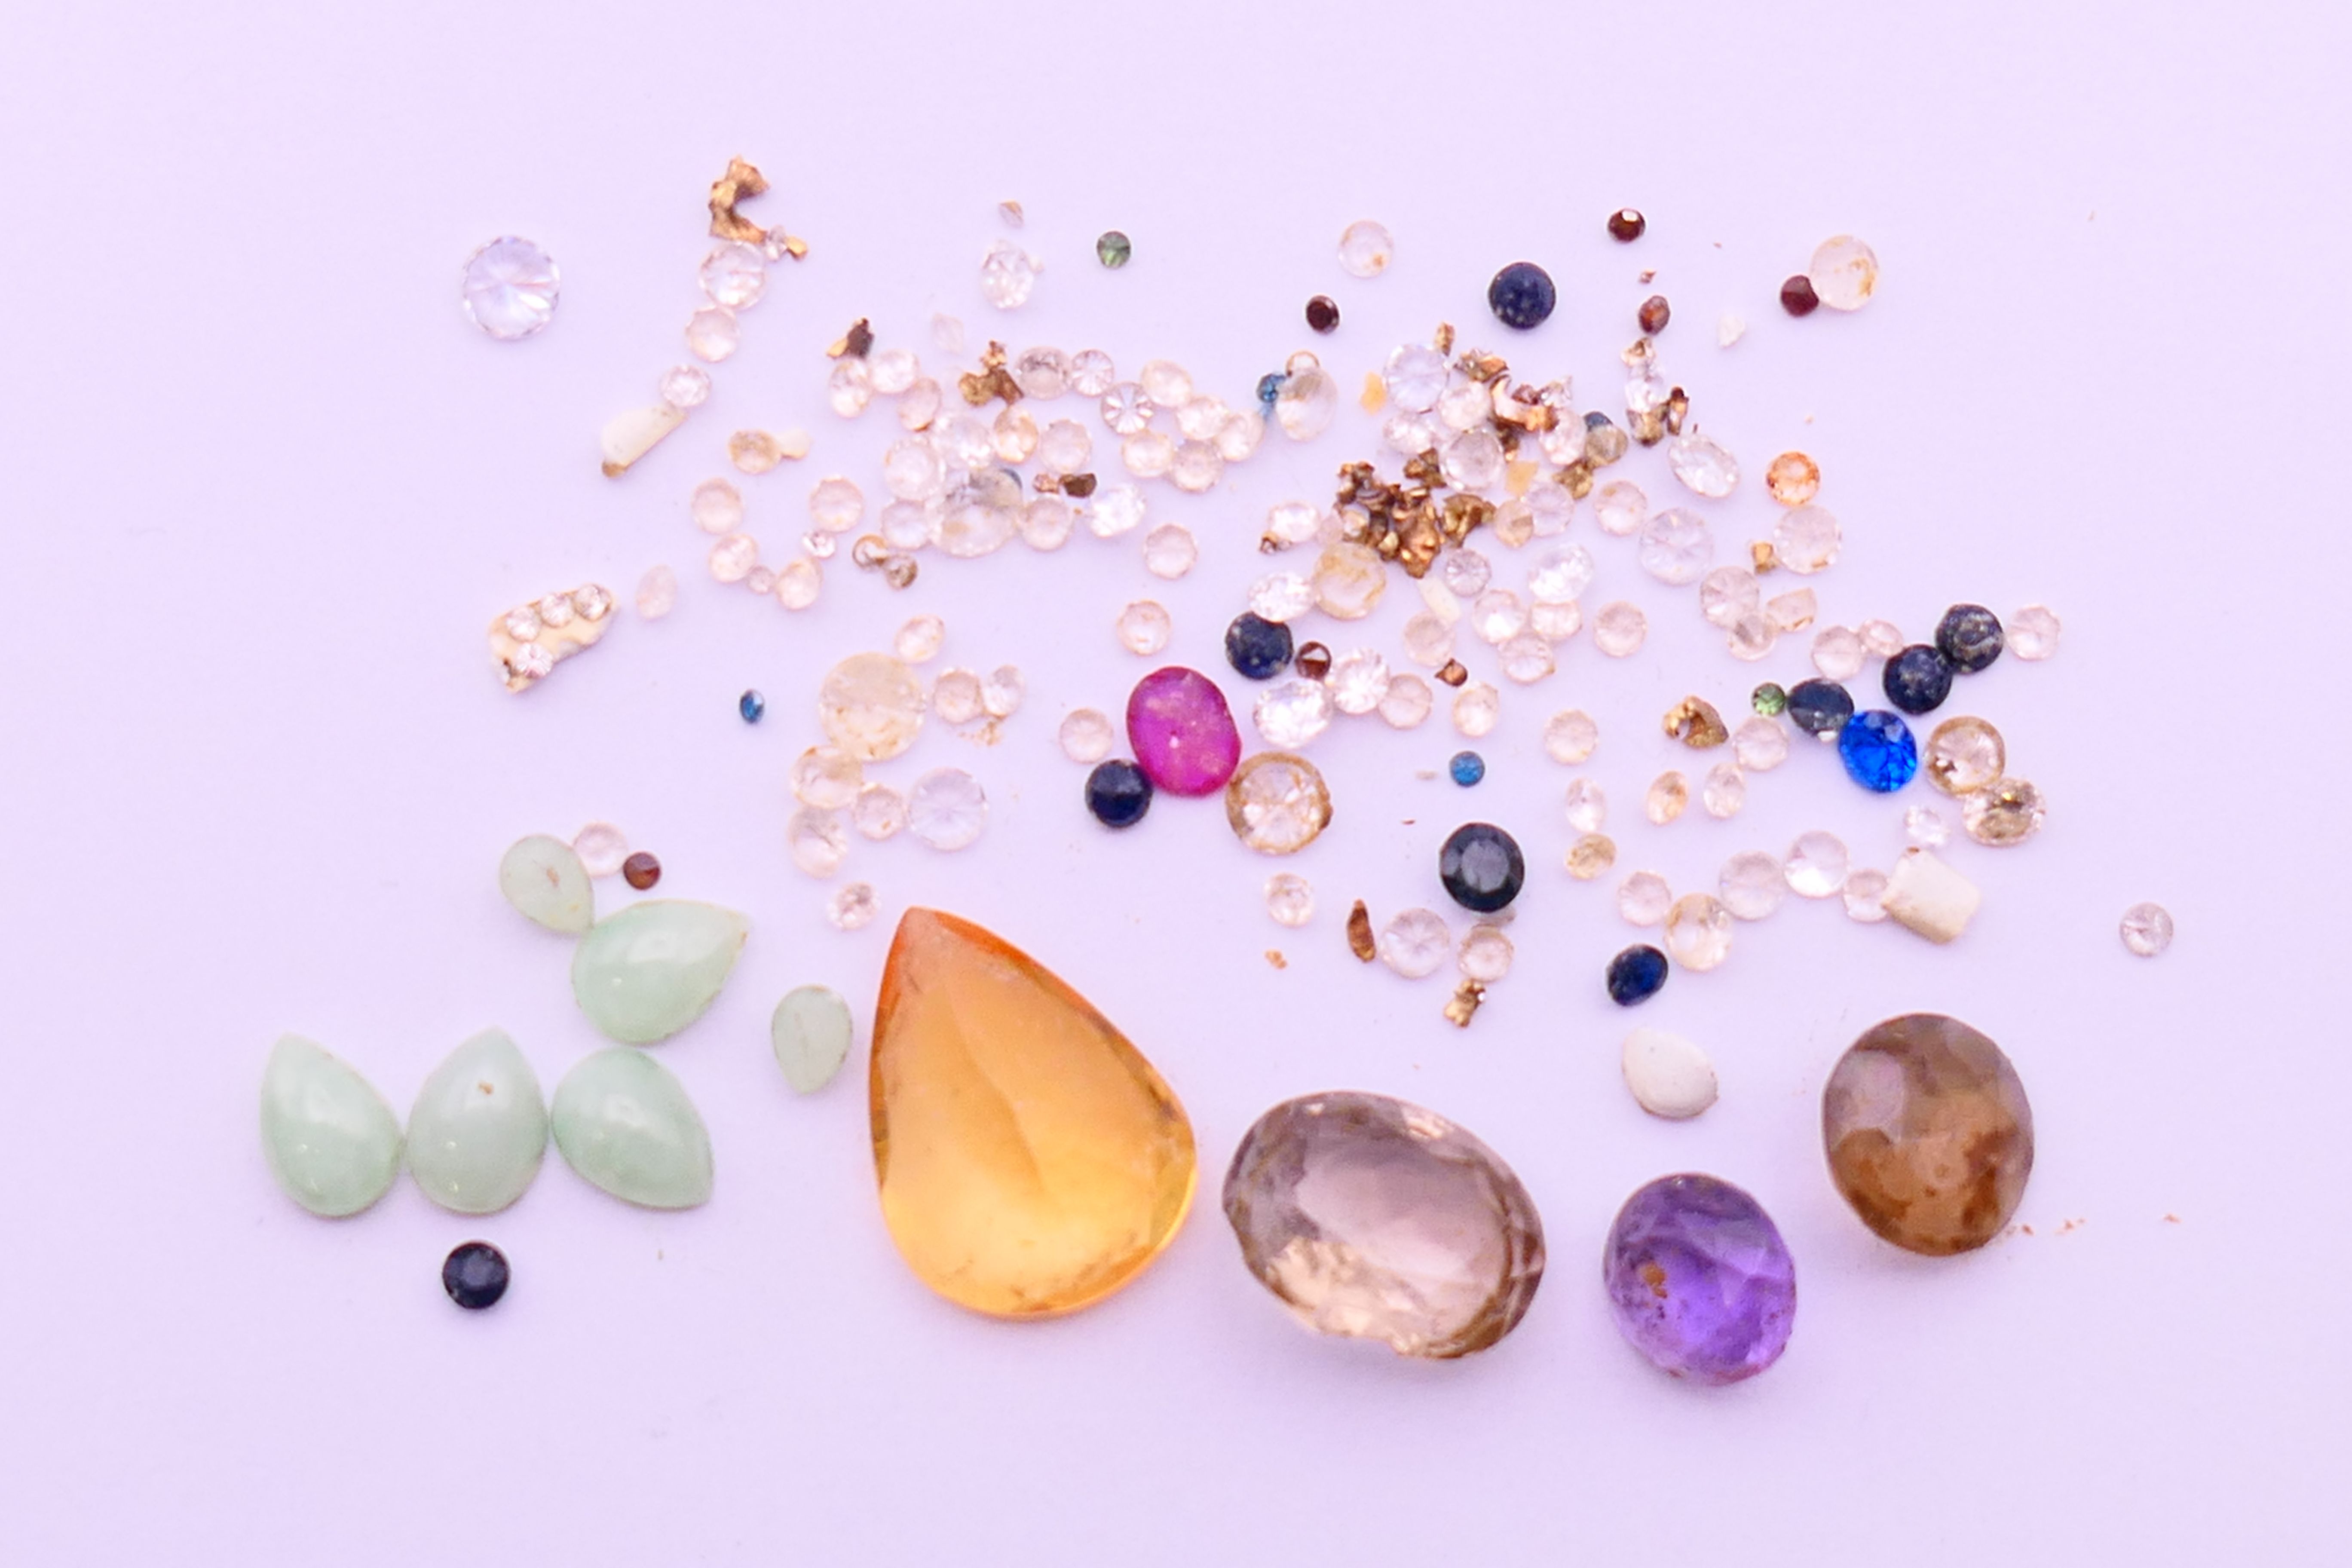 A collection of gemstones, includes diamonds, sapphires, ruby, etc.